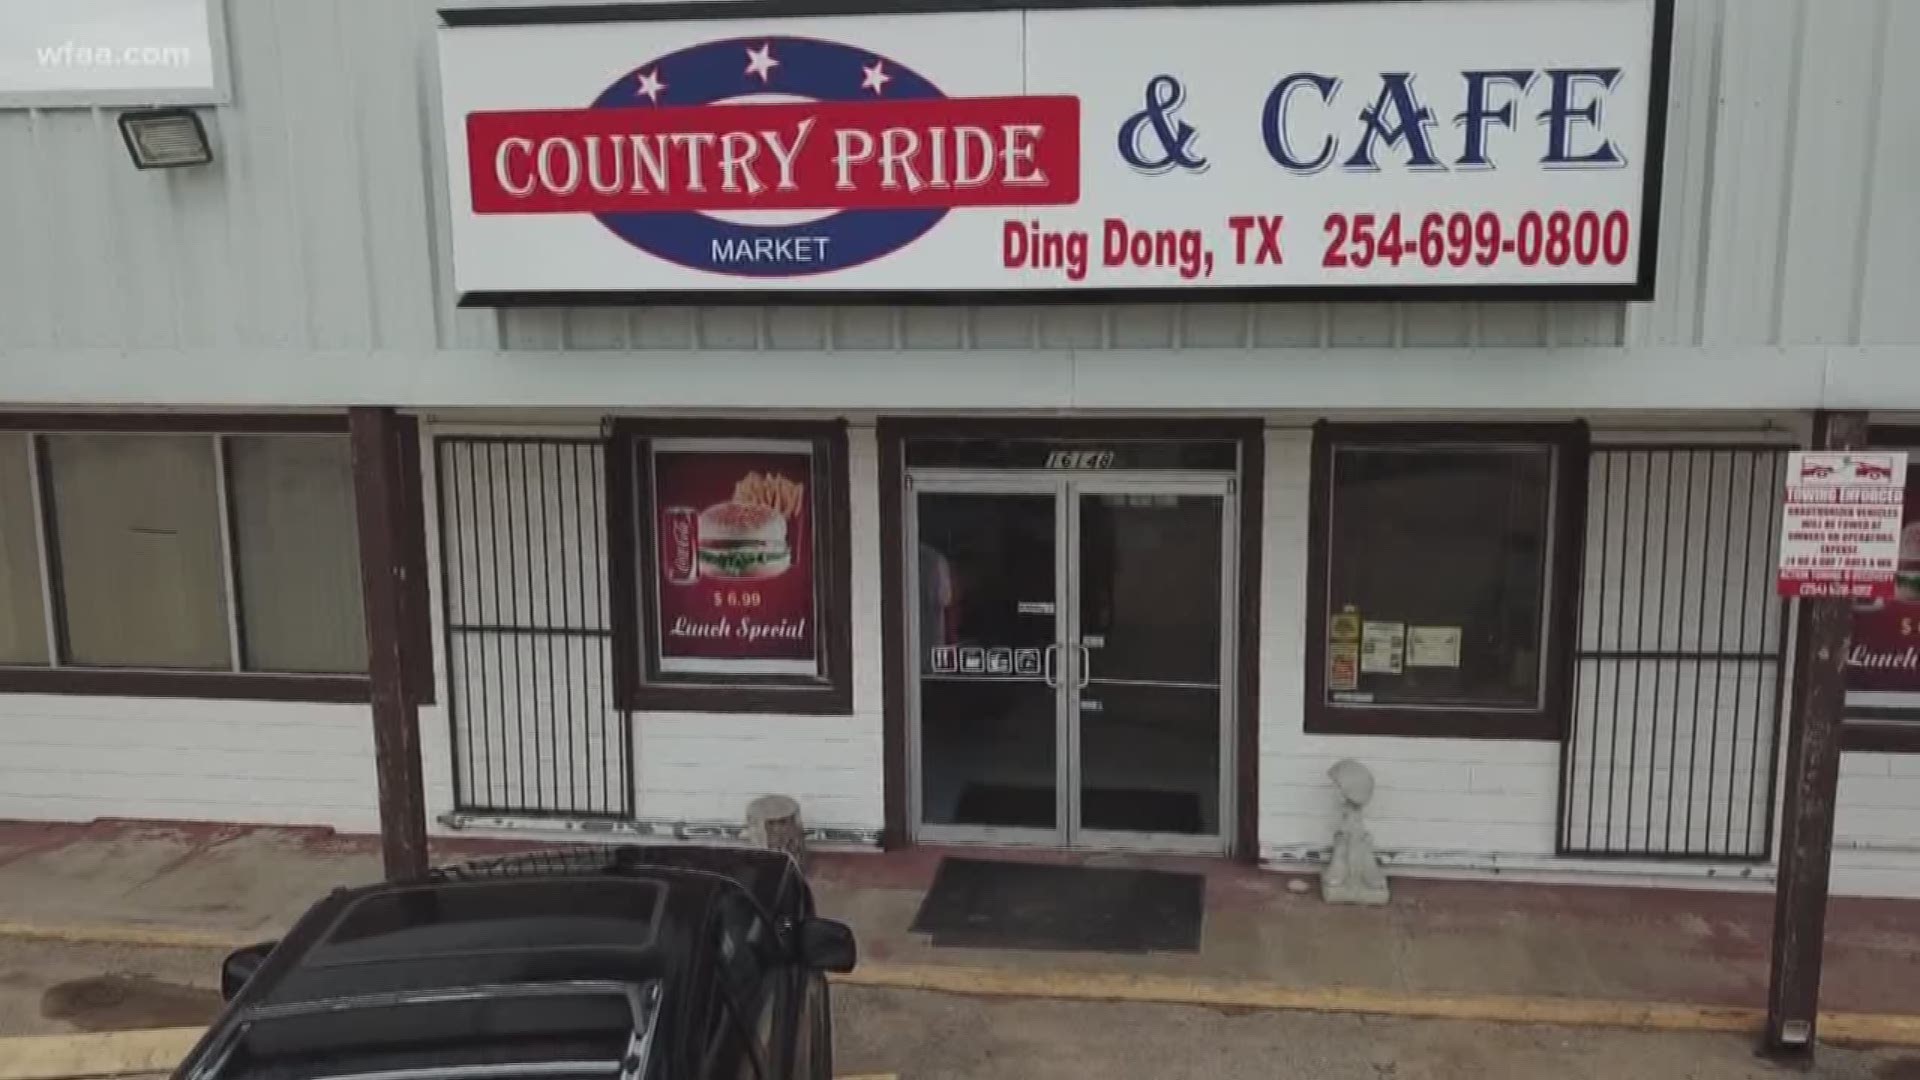 Ding Dong, Texas: Where'd the name come from?